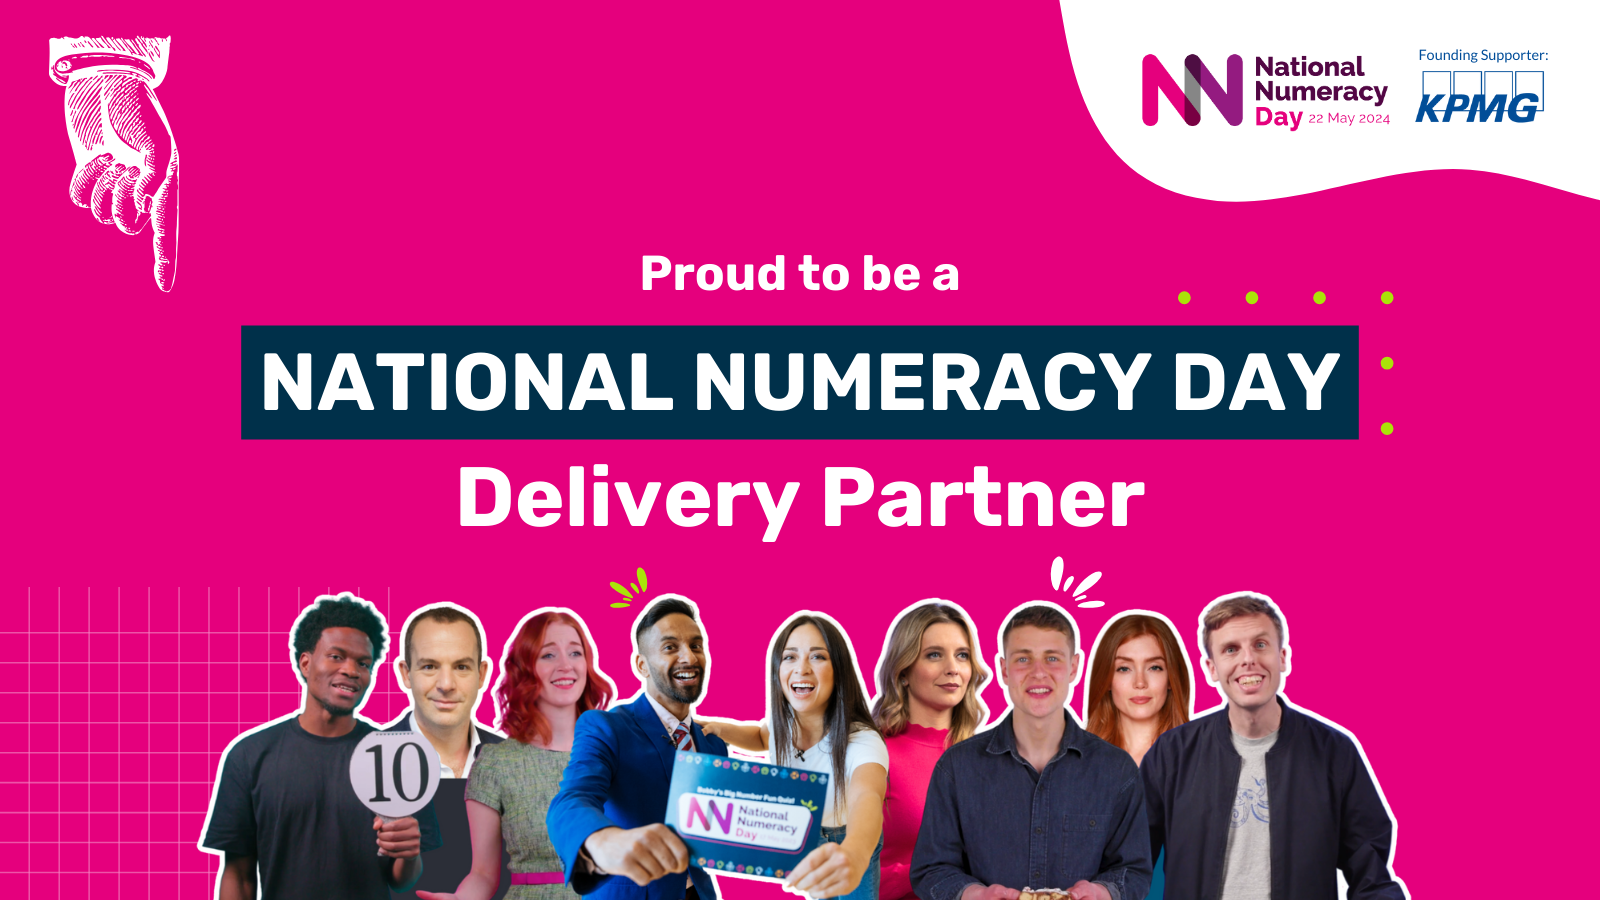 Instagram graphic saying "Proud to be a National Numeracy Day Lead Supporter"